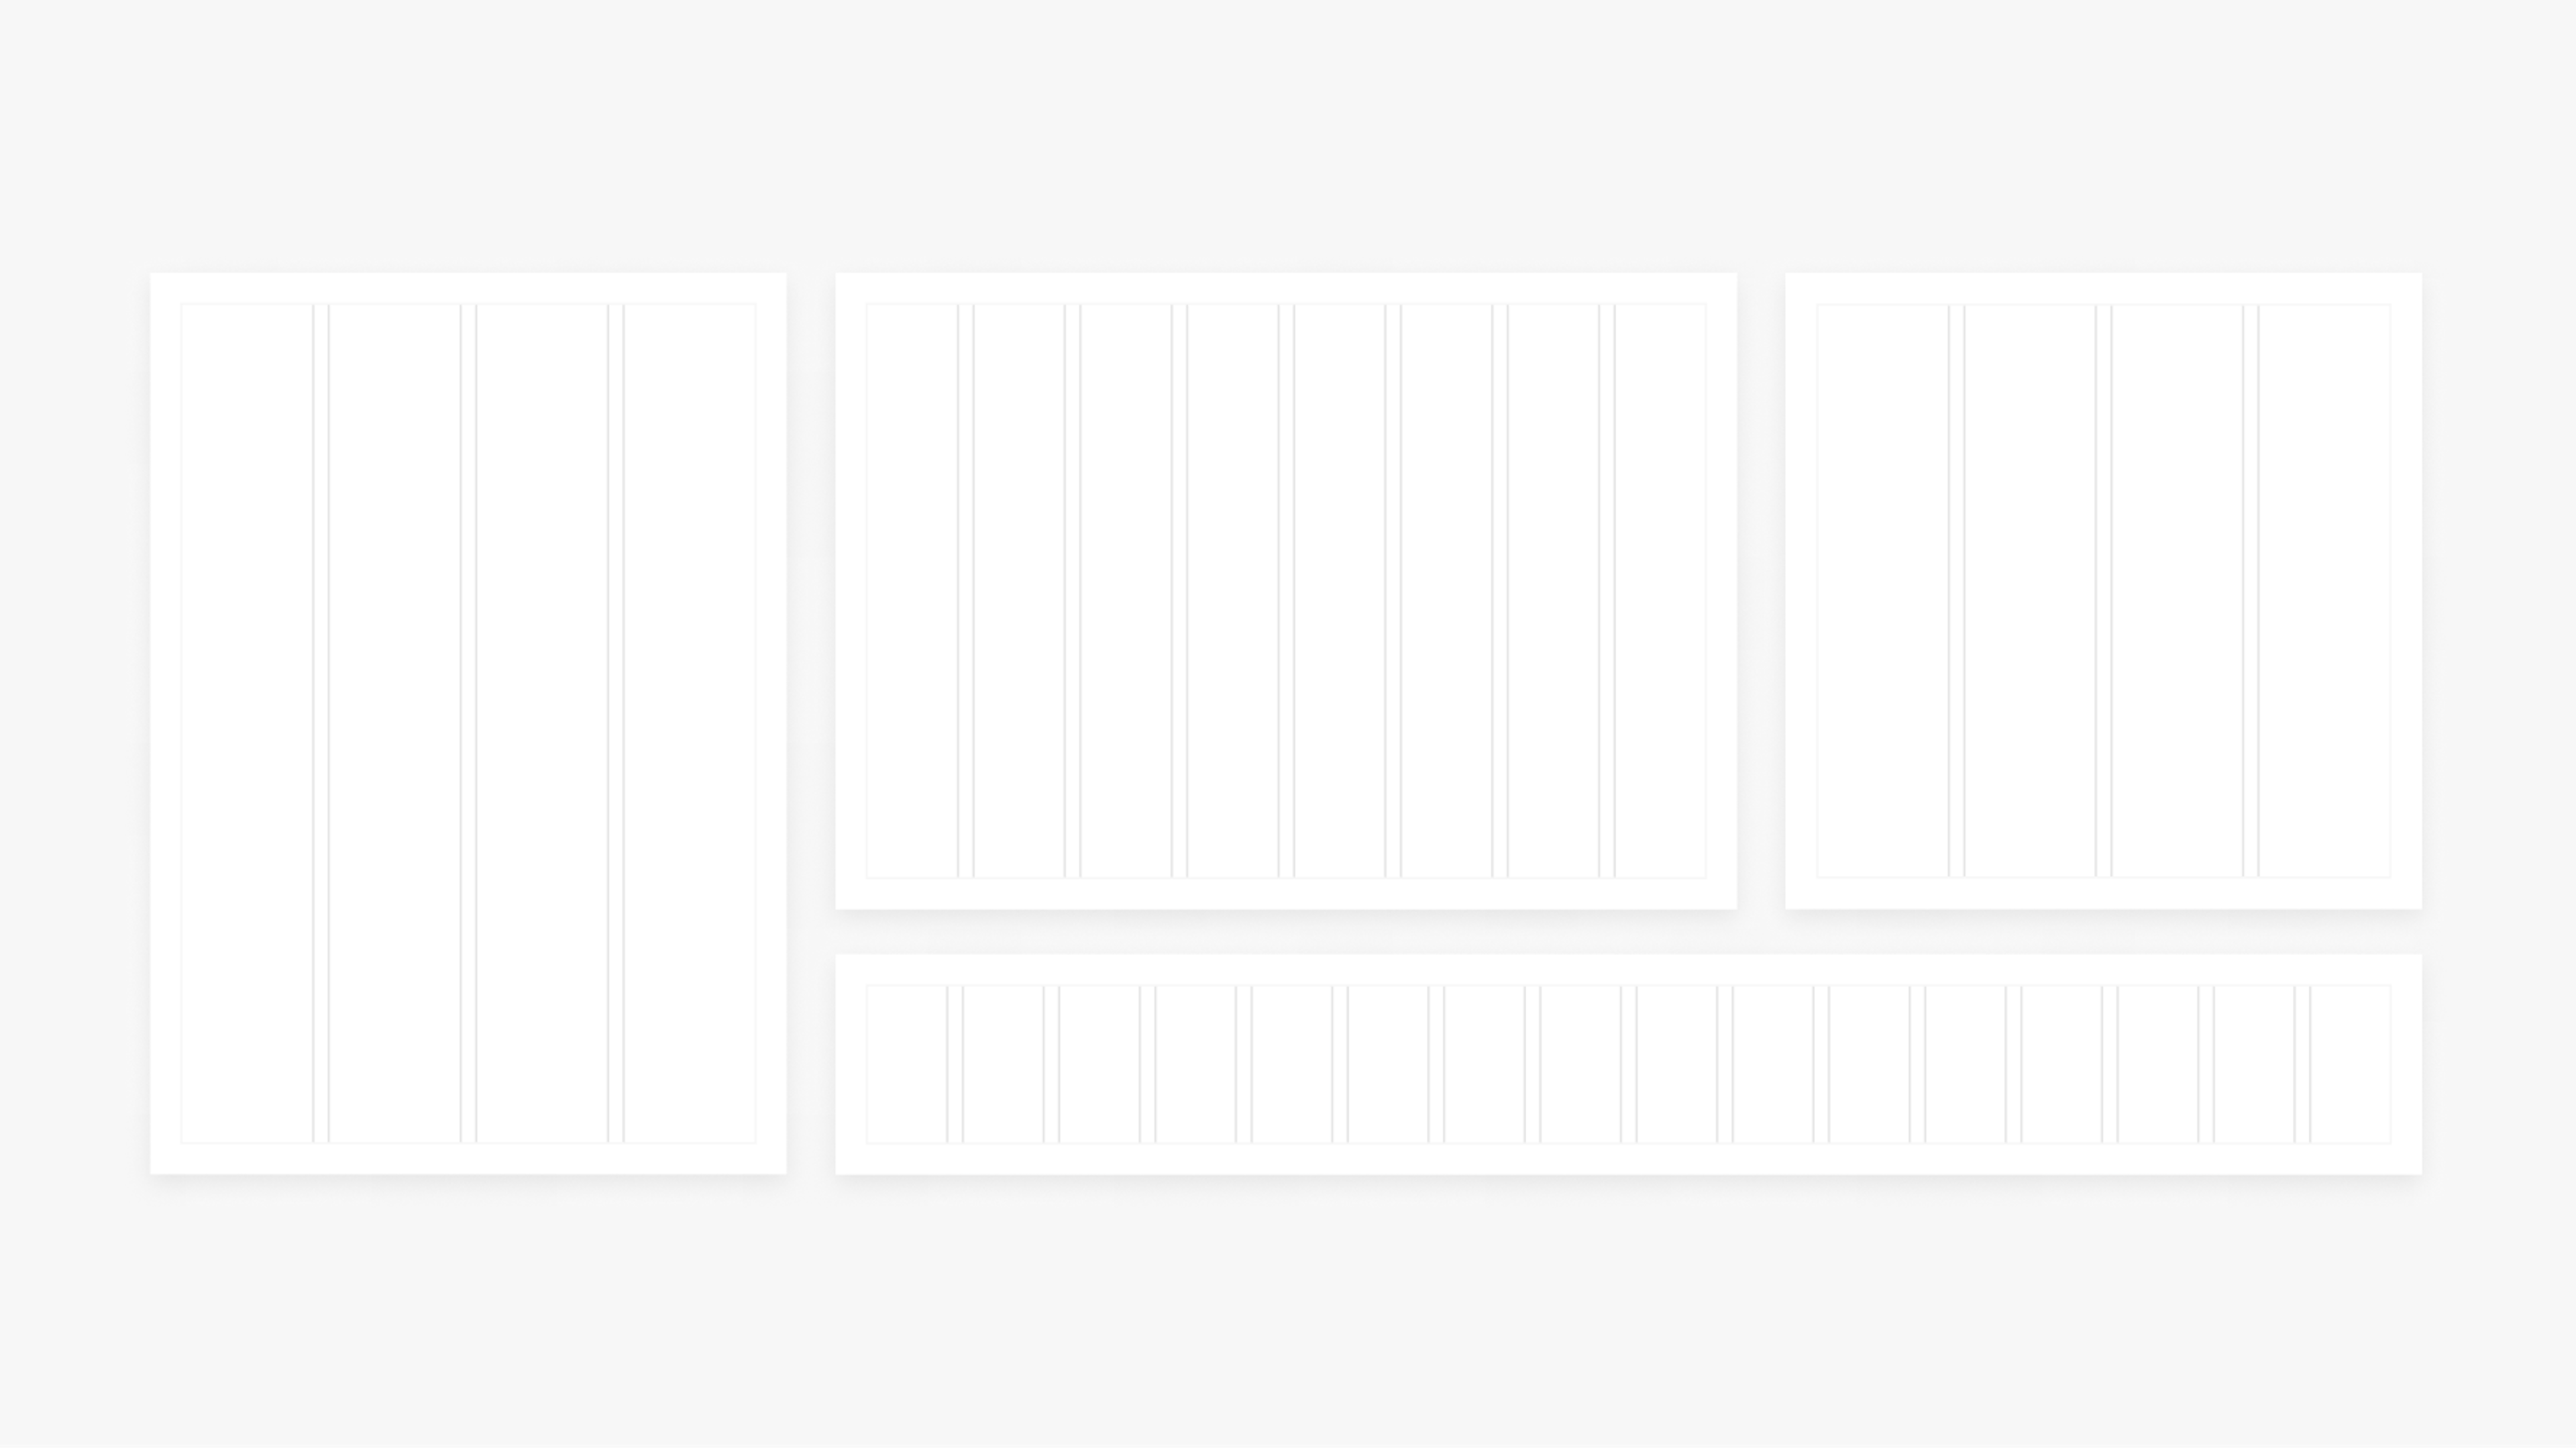 A variety of graphic, simple layout diagrams detailing a variety of grids.